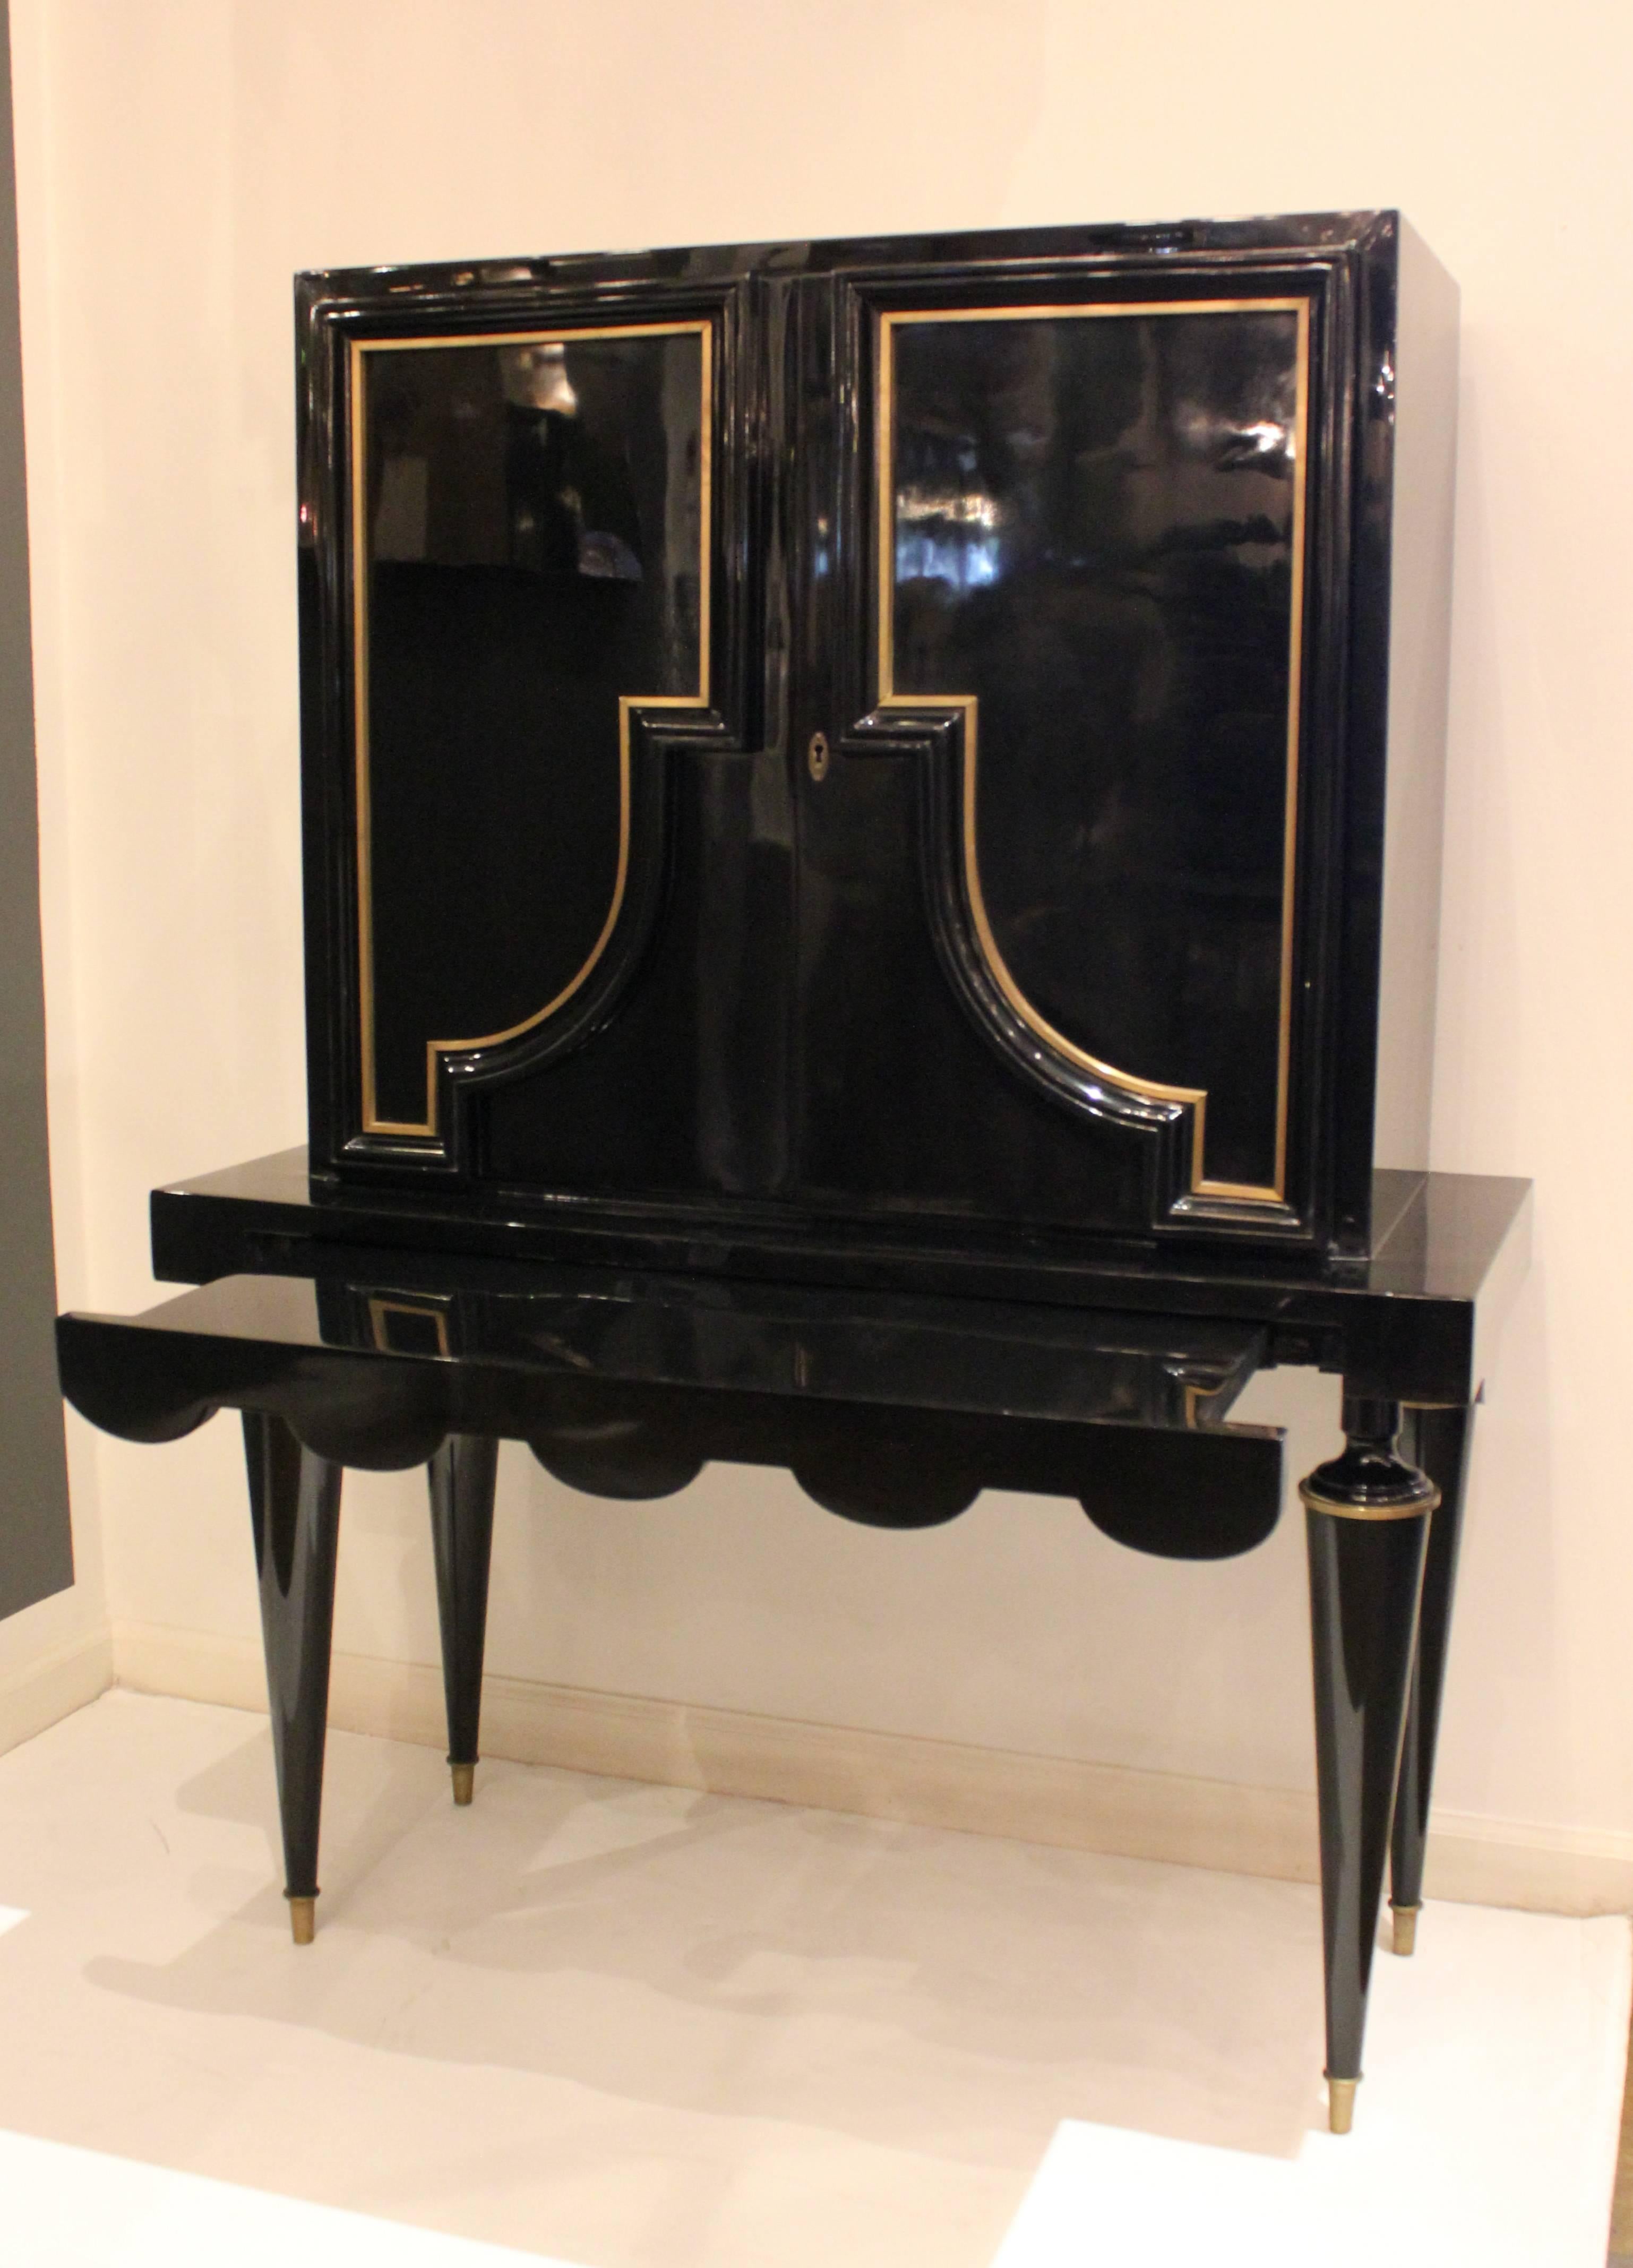 Black lacquer Arturo Pani cabinet with brass inlay. Recently restored.
Two doors with interior hardware to hang glassware. Scalloped pull-out shelf
1940s.